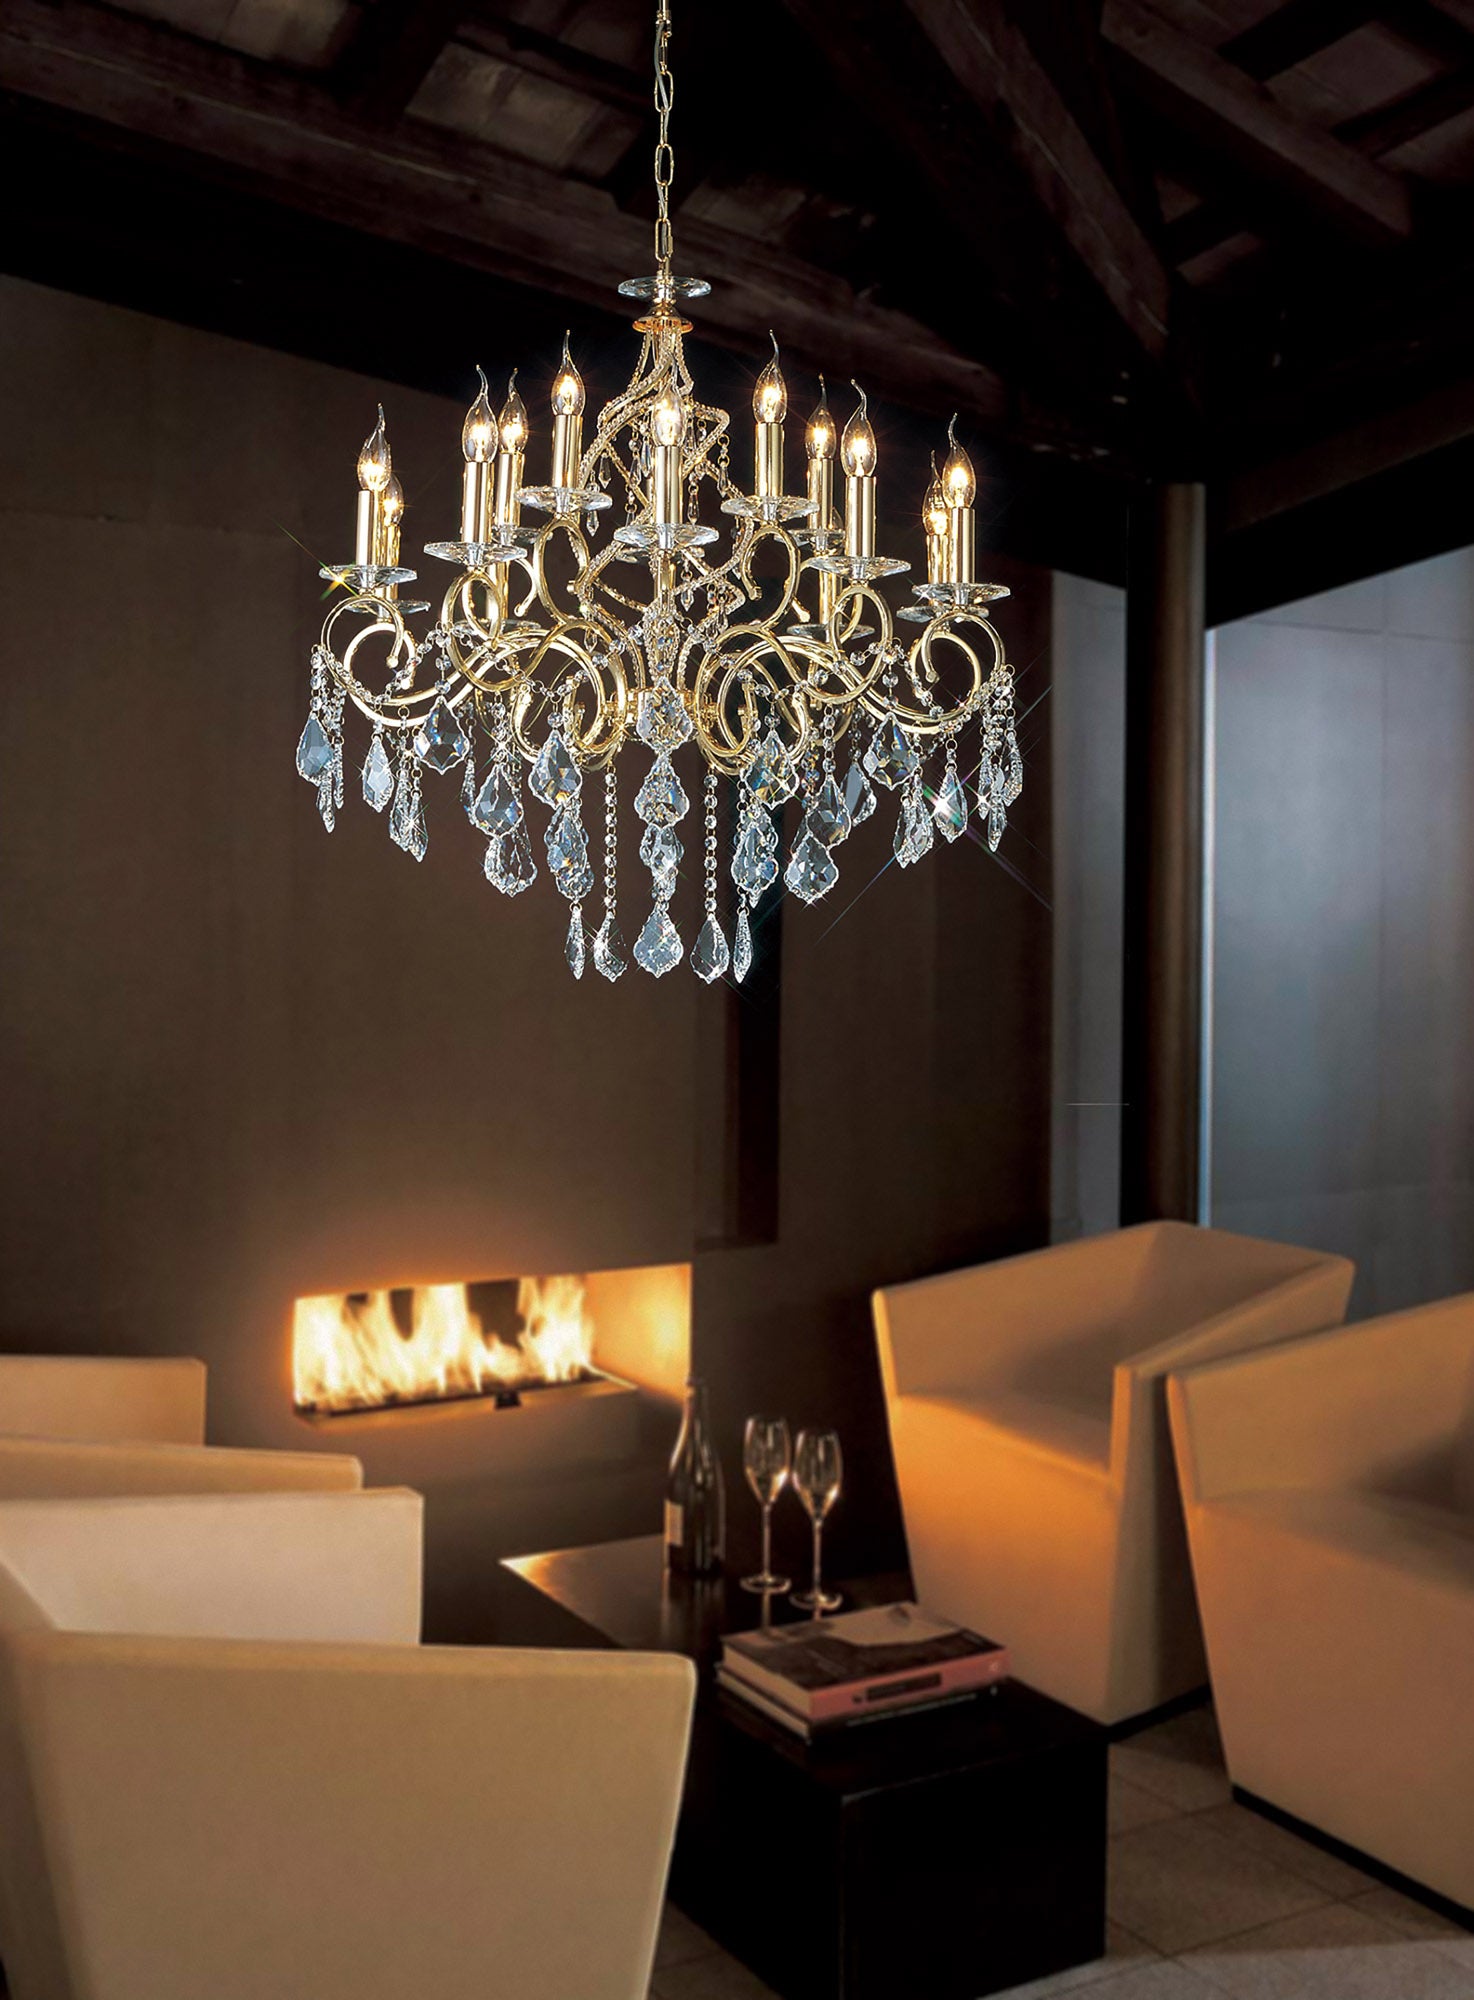 Torino Crystal 18 Light Chandelier by Diyas IL303212+6 with French Gold Frame